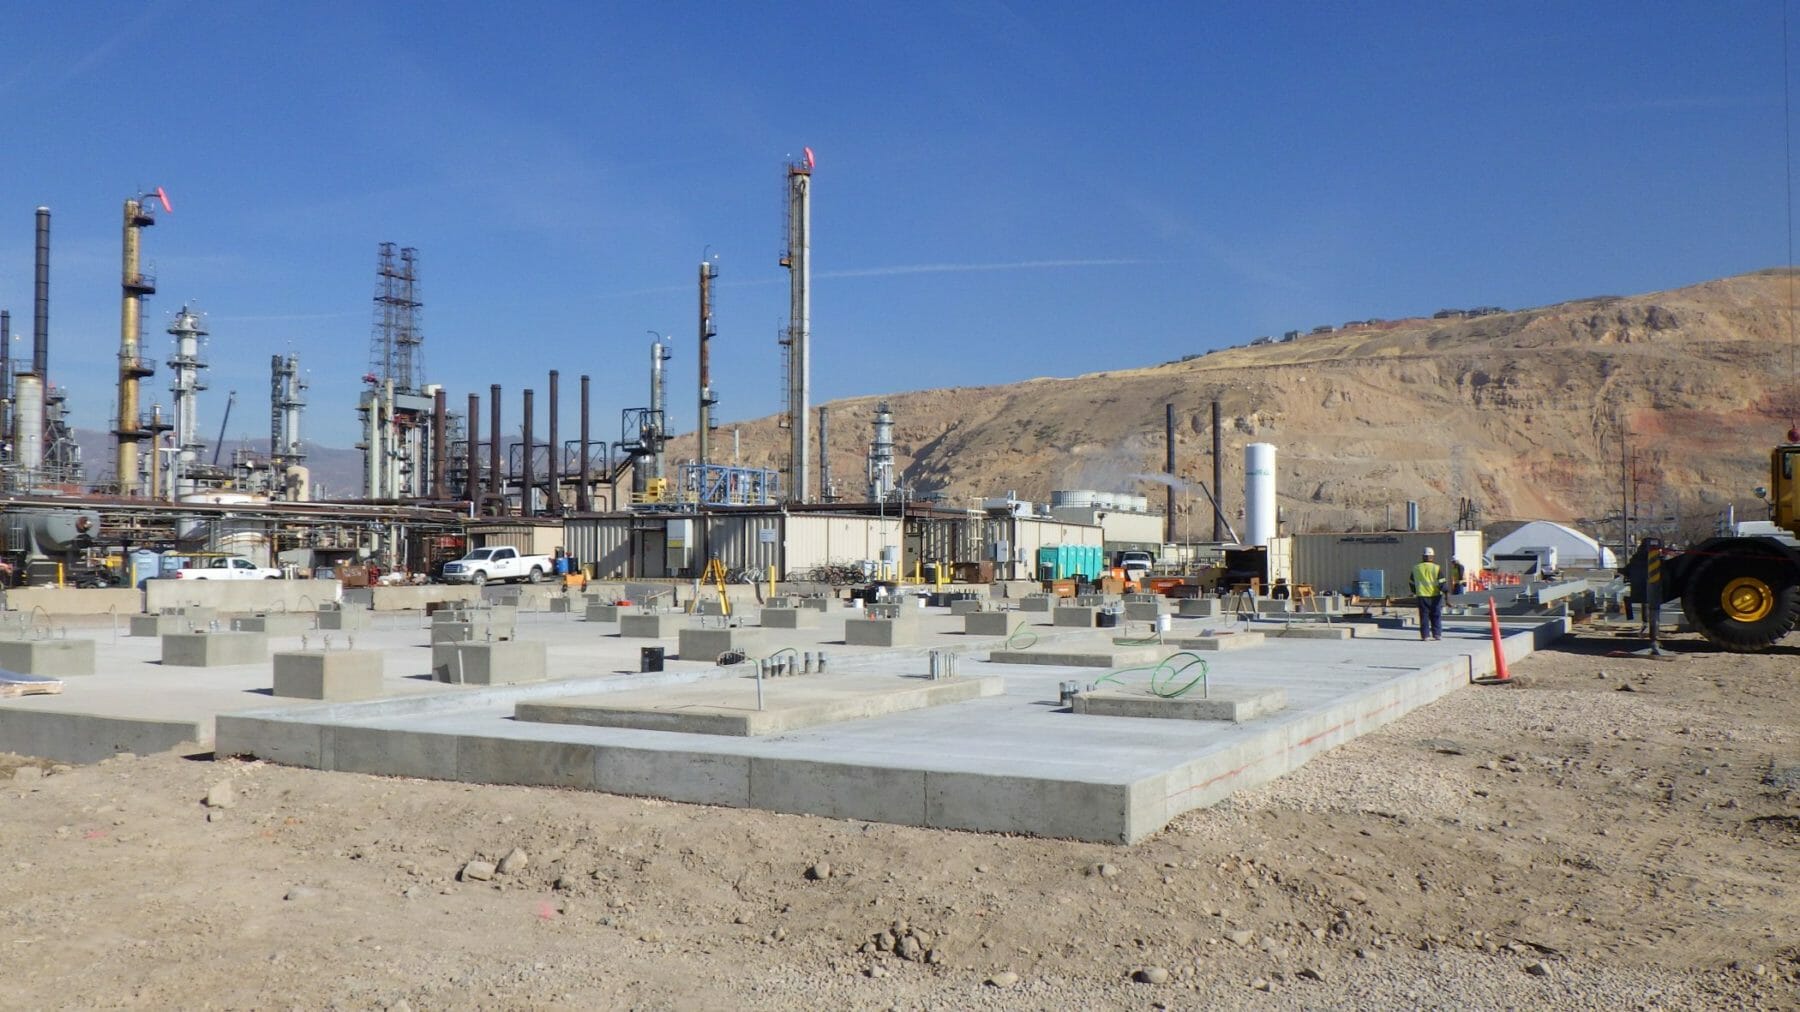 Cement Foundation Industrial Construction | Oil & Gas Refinery Construction Projects | Wollam Construction